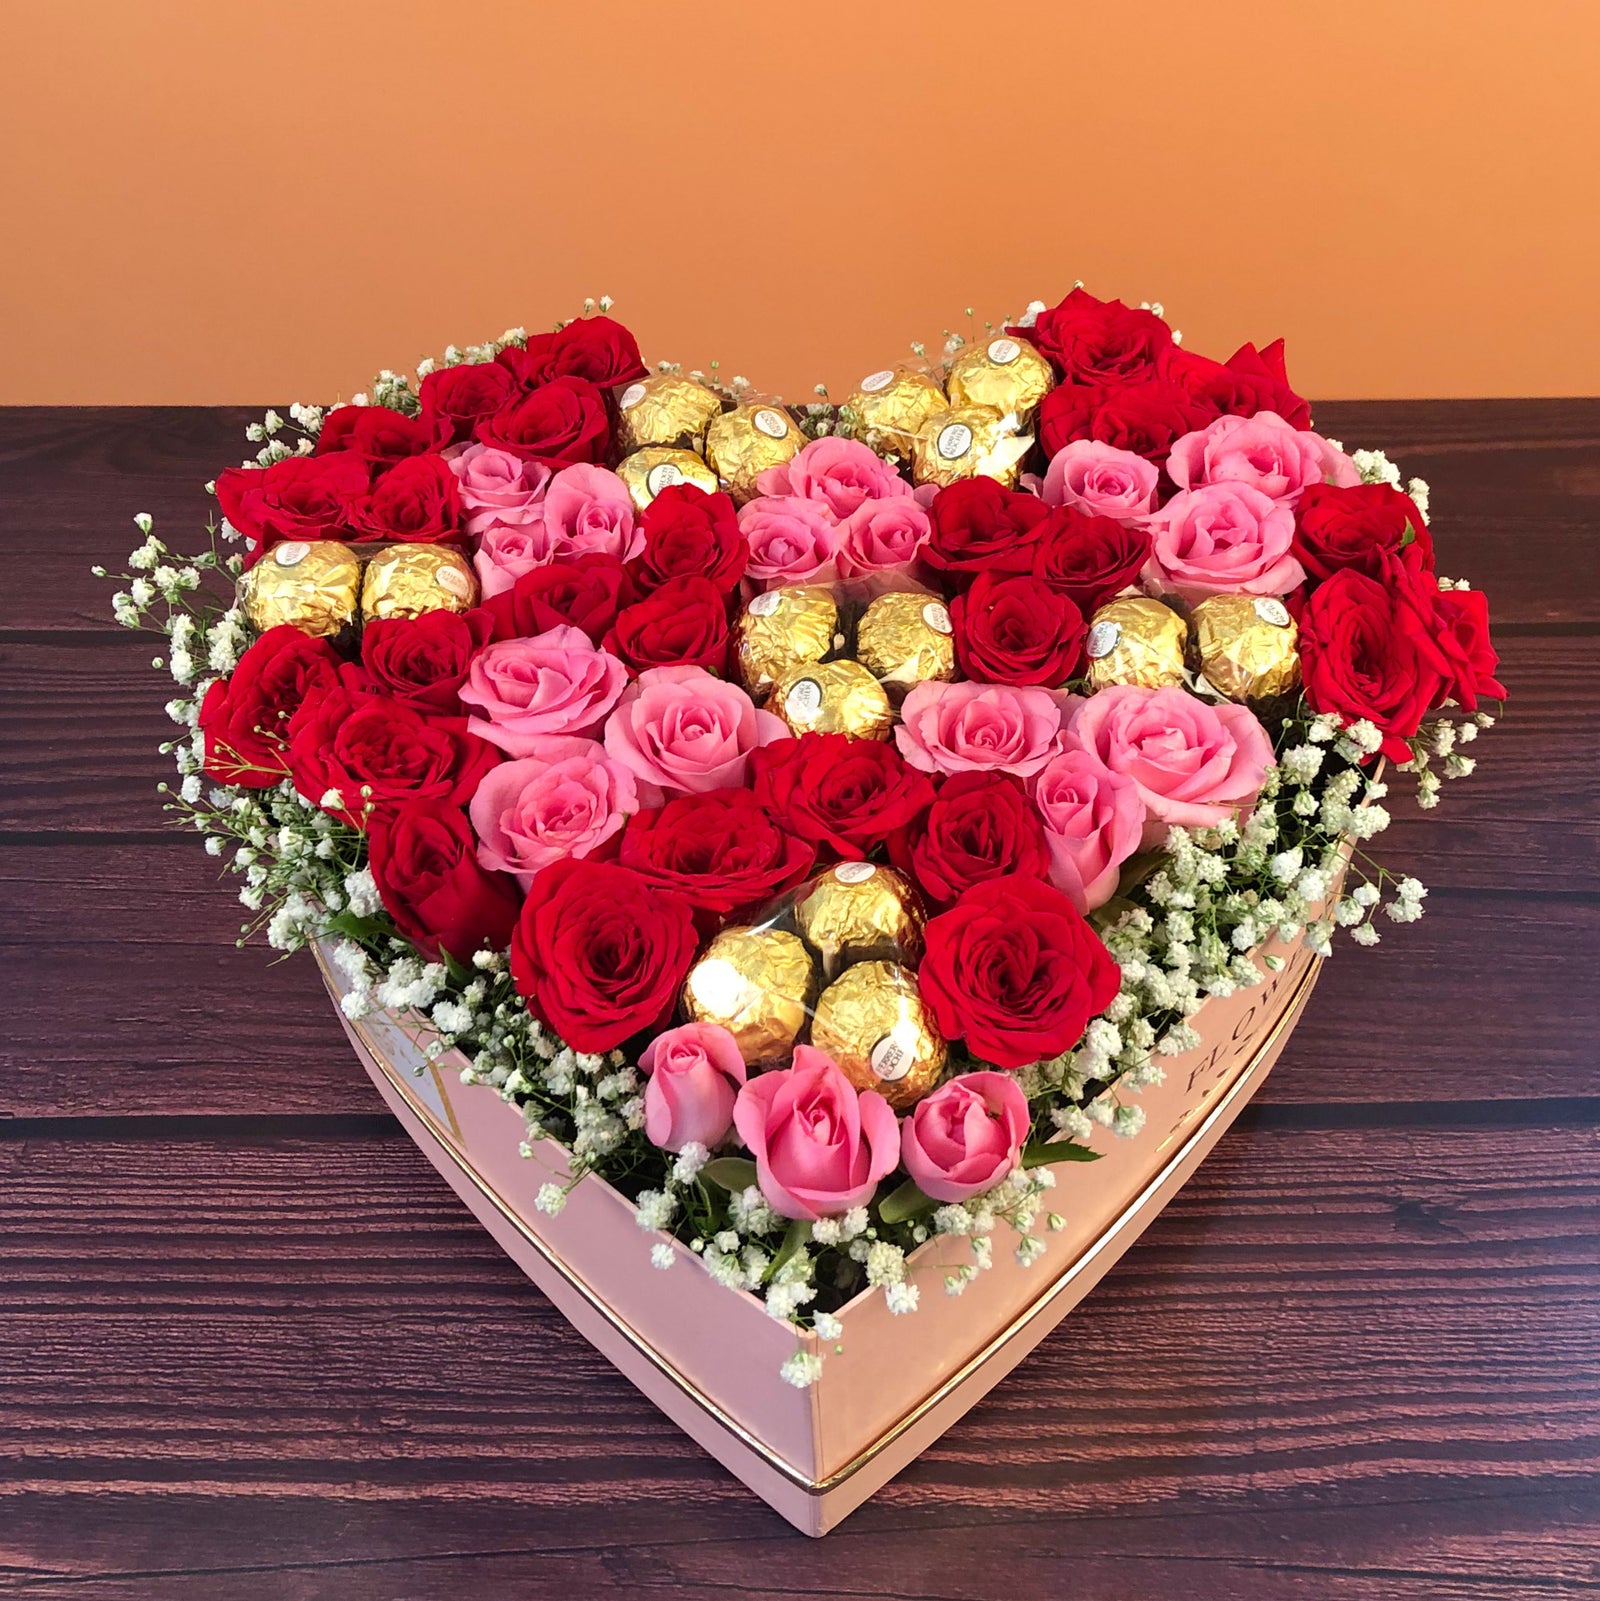 Roses and chocolate delivery in Heart shaped box